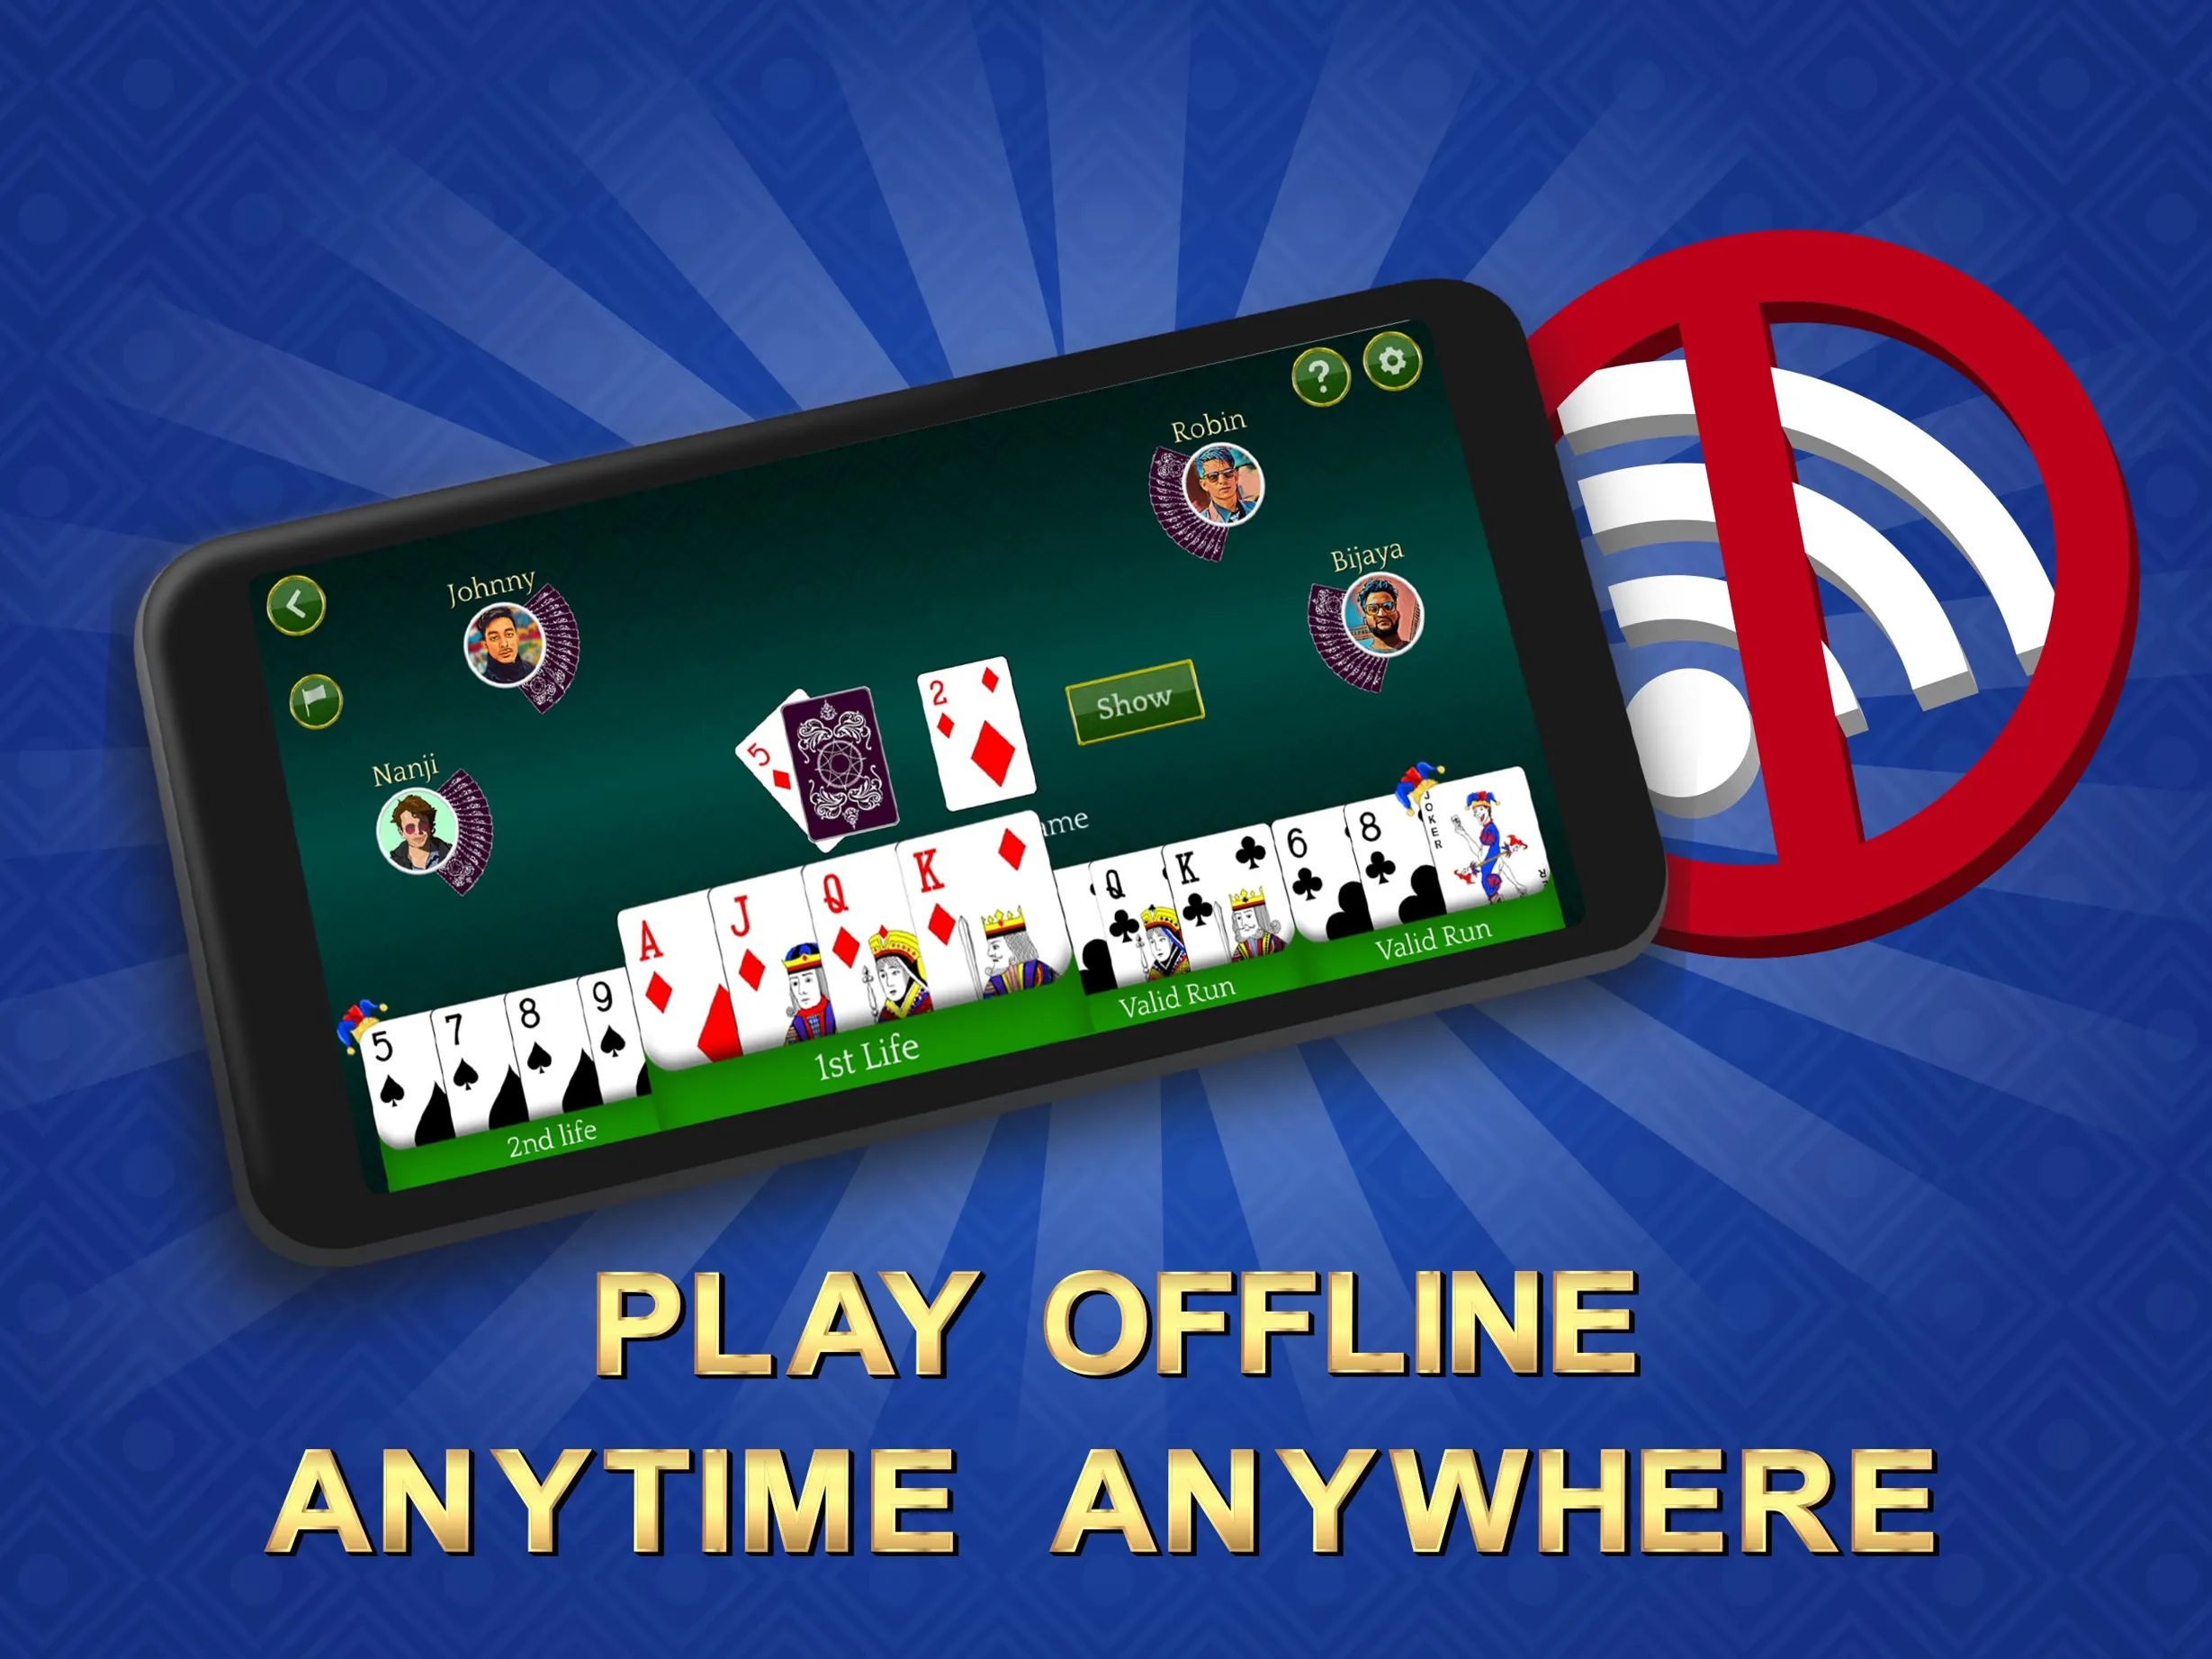 How about which rummy app gives money?